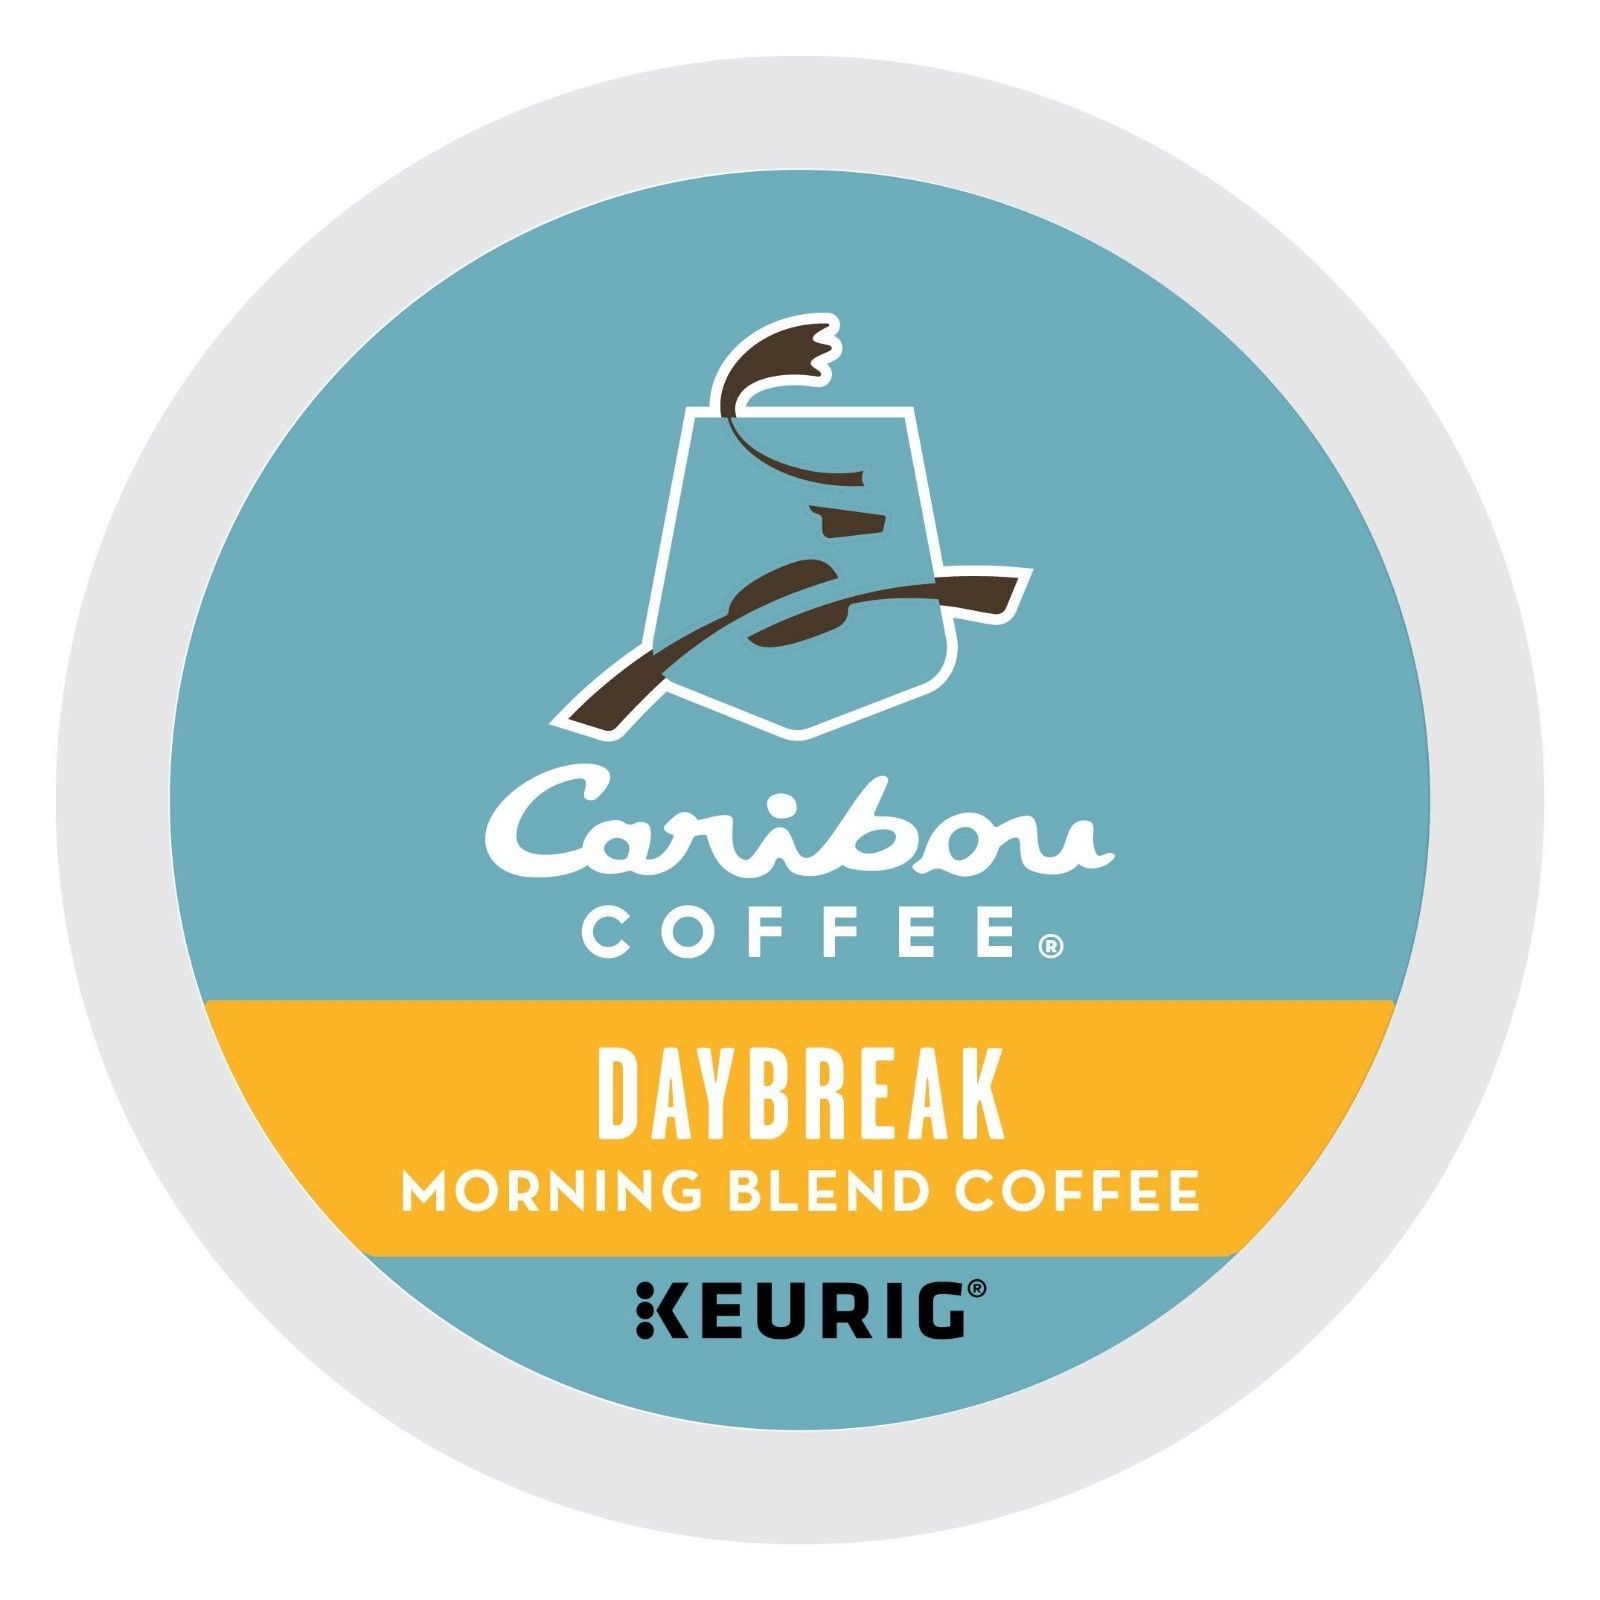 Caribou Daybreak Morning Blend Coffee 24 to 144 Keurig K cups Pick Any Size  - $24.89 - $109.99